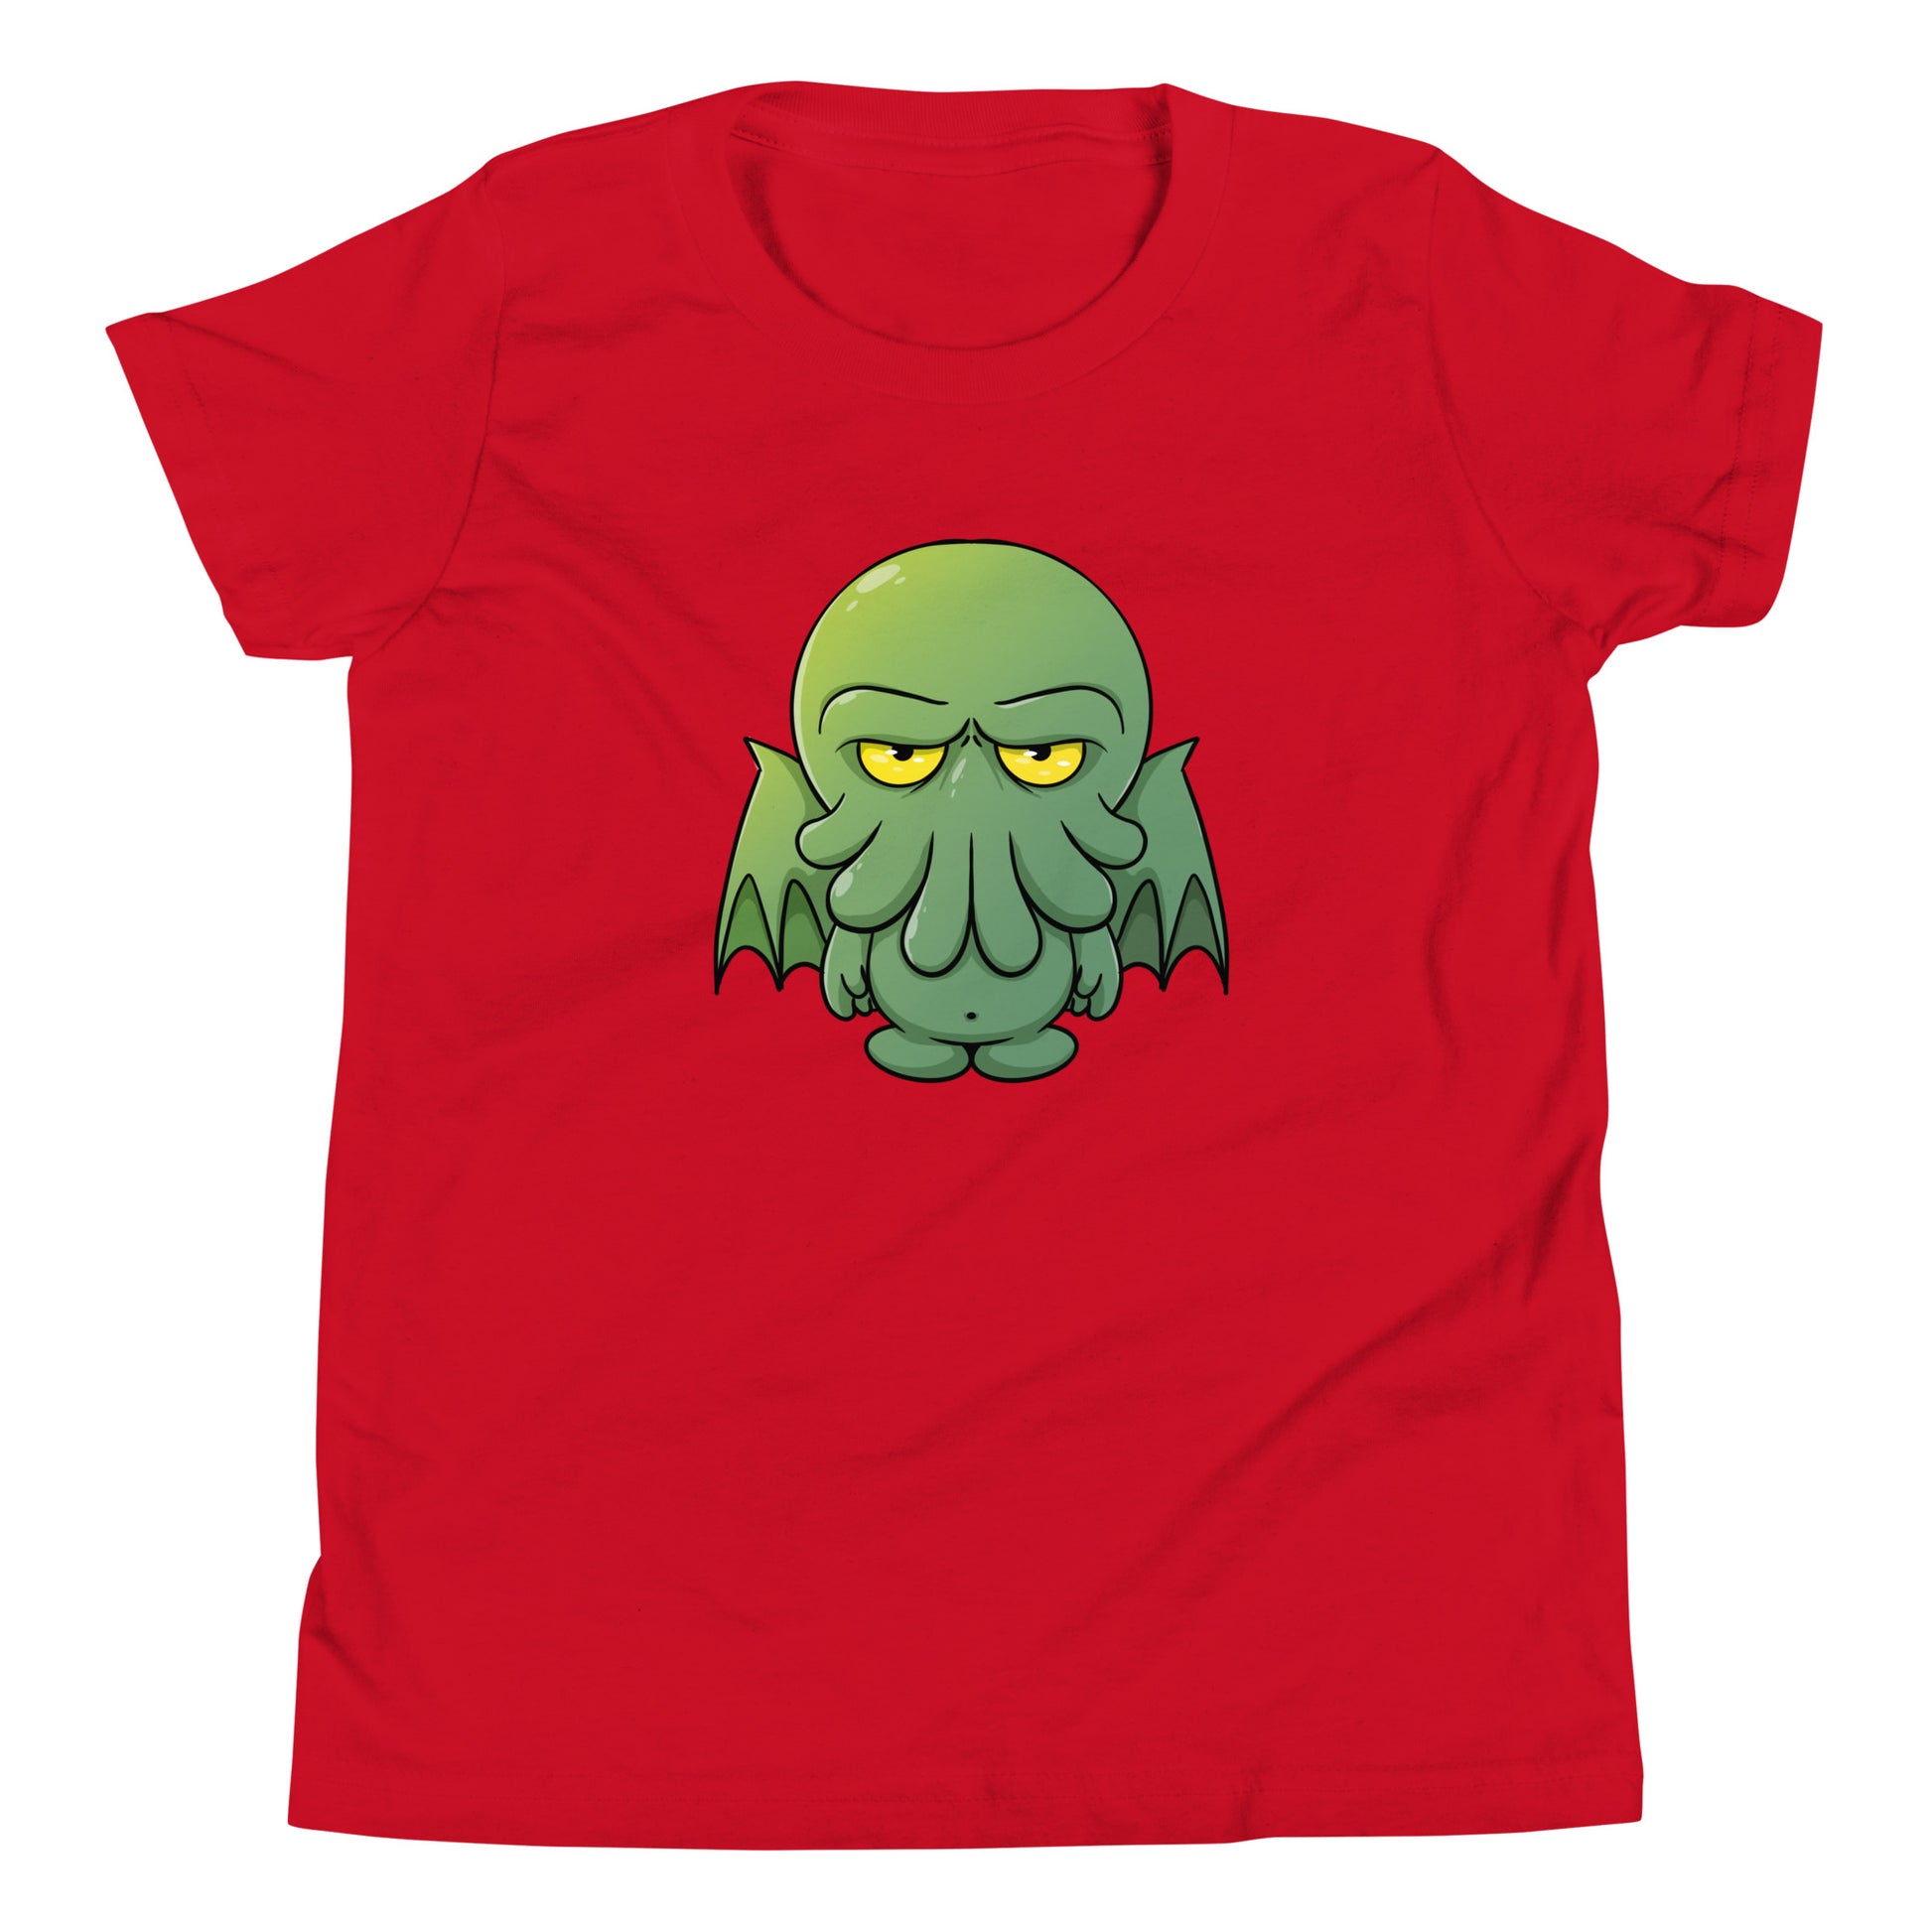 Chibi Cthulu Youth Short Sleeve T-Shirt  Level 1 Gamers Red S 